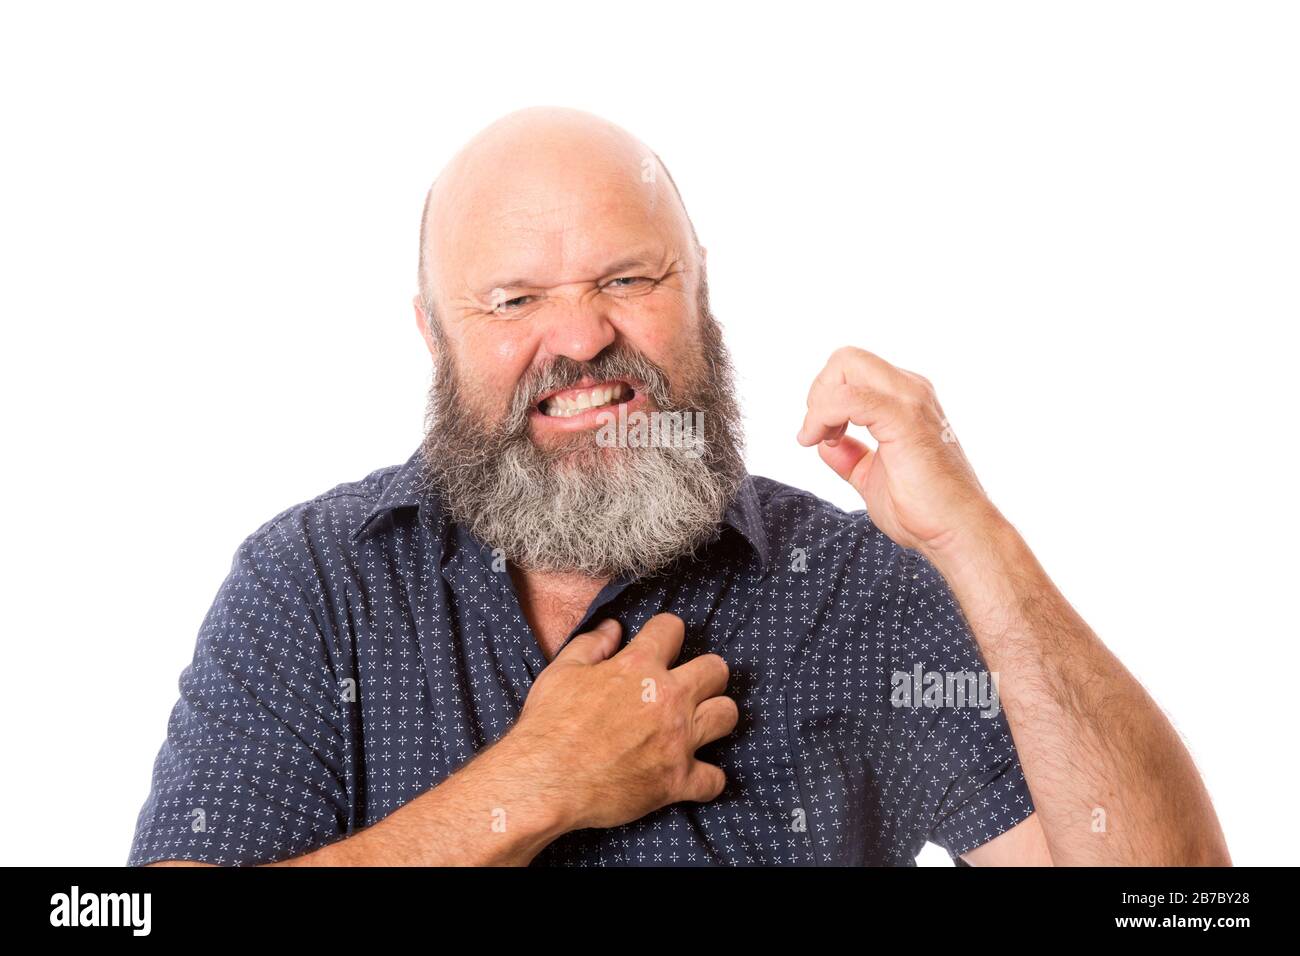 A man with itchy skin scratching himself. Stock Photo